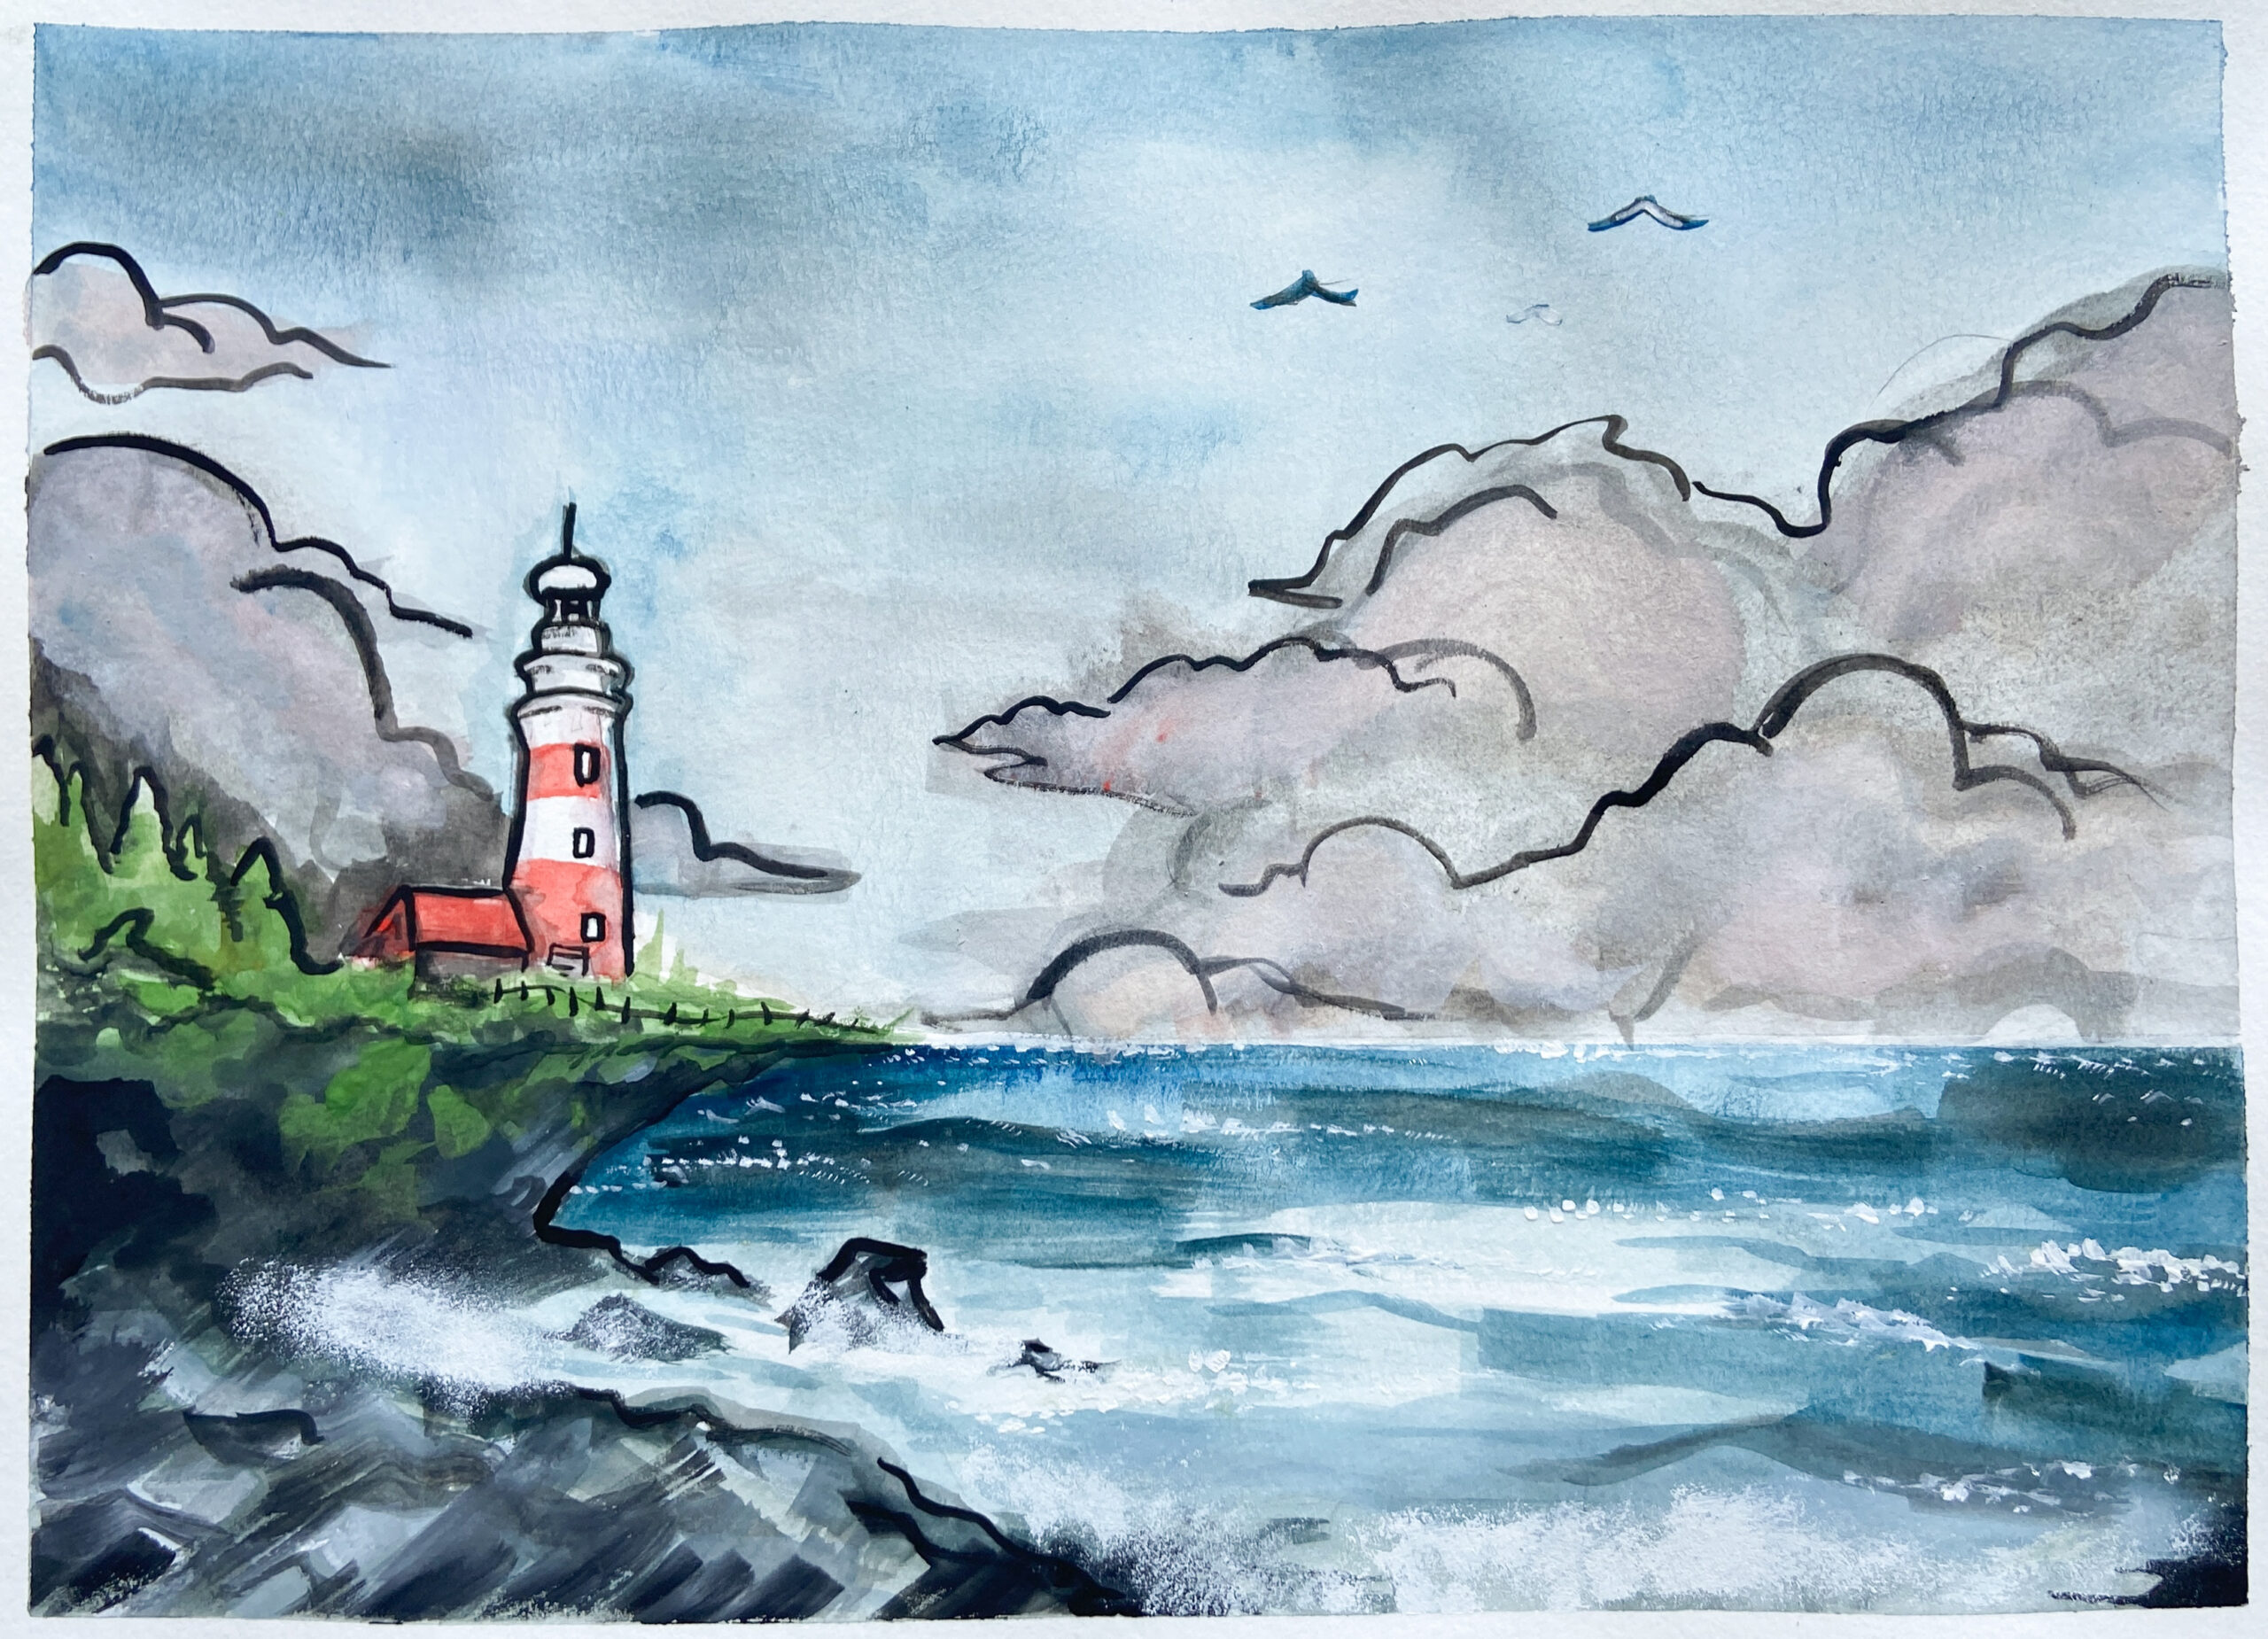 In-Studio Watercolour Paint Night - Lighthouse on the Shore